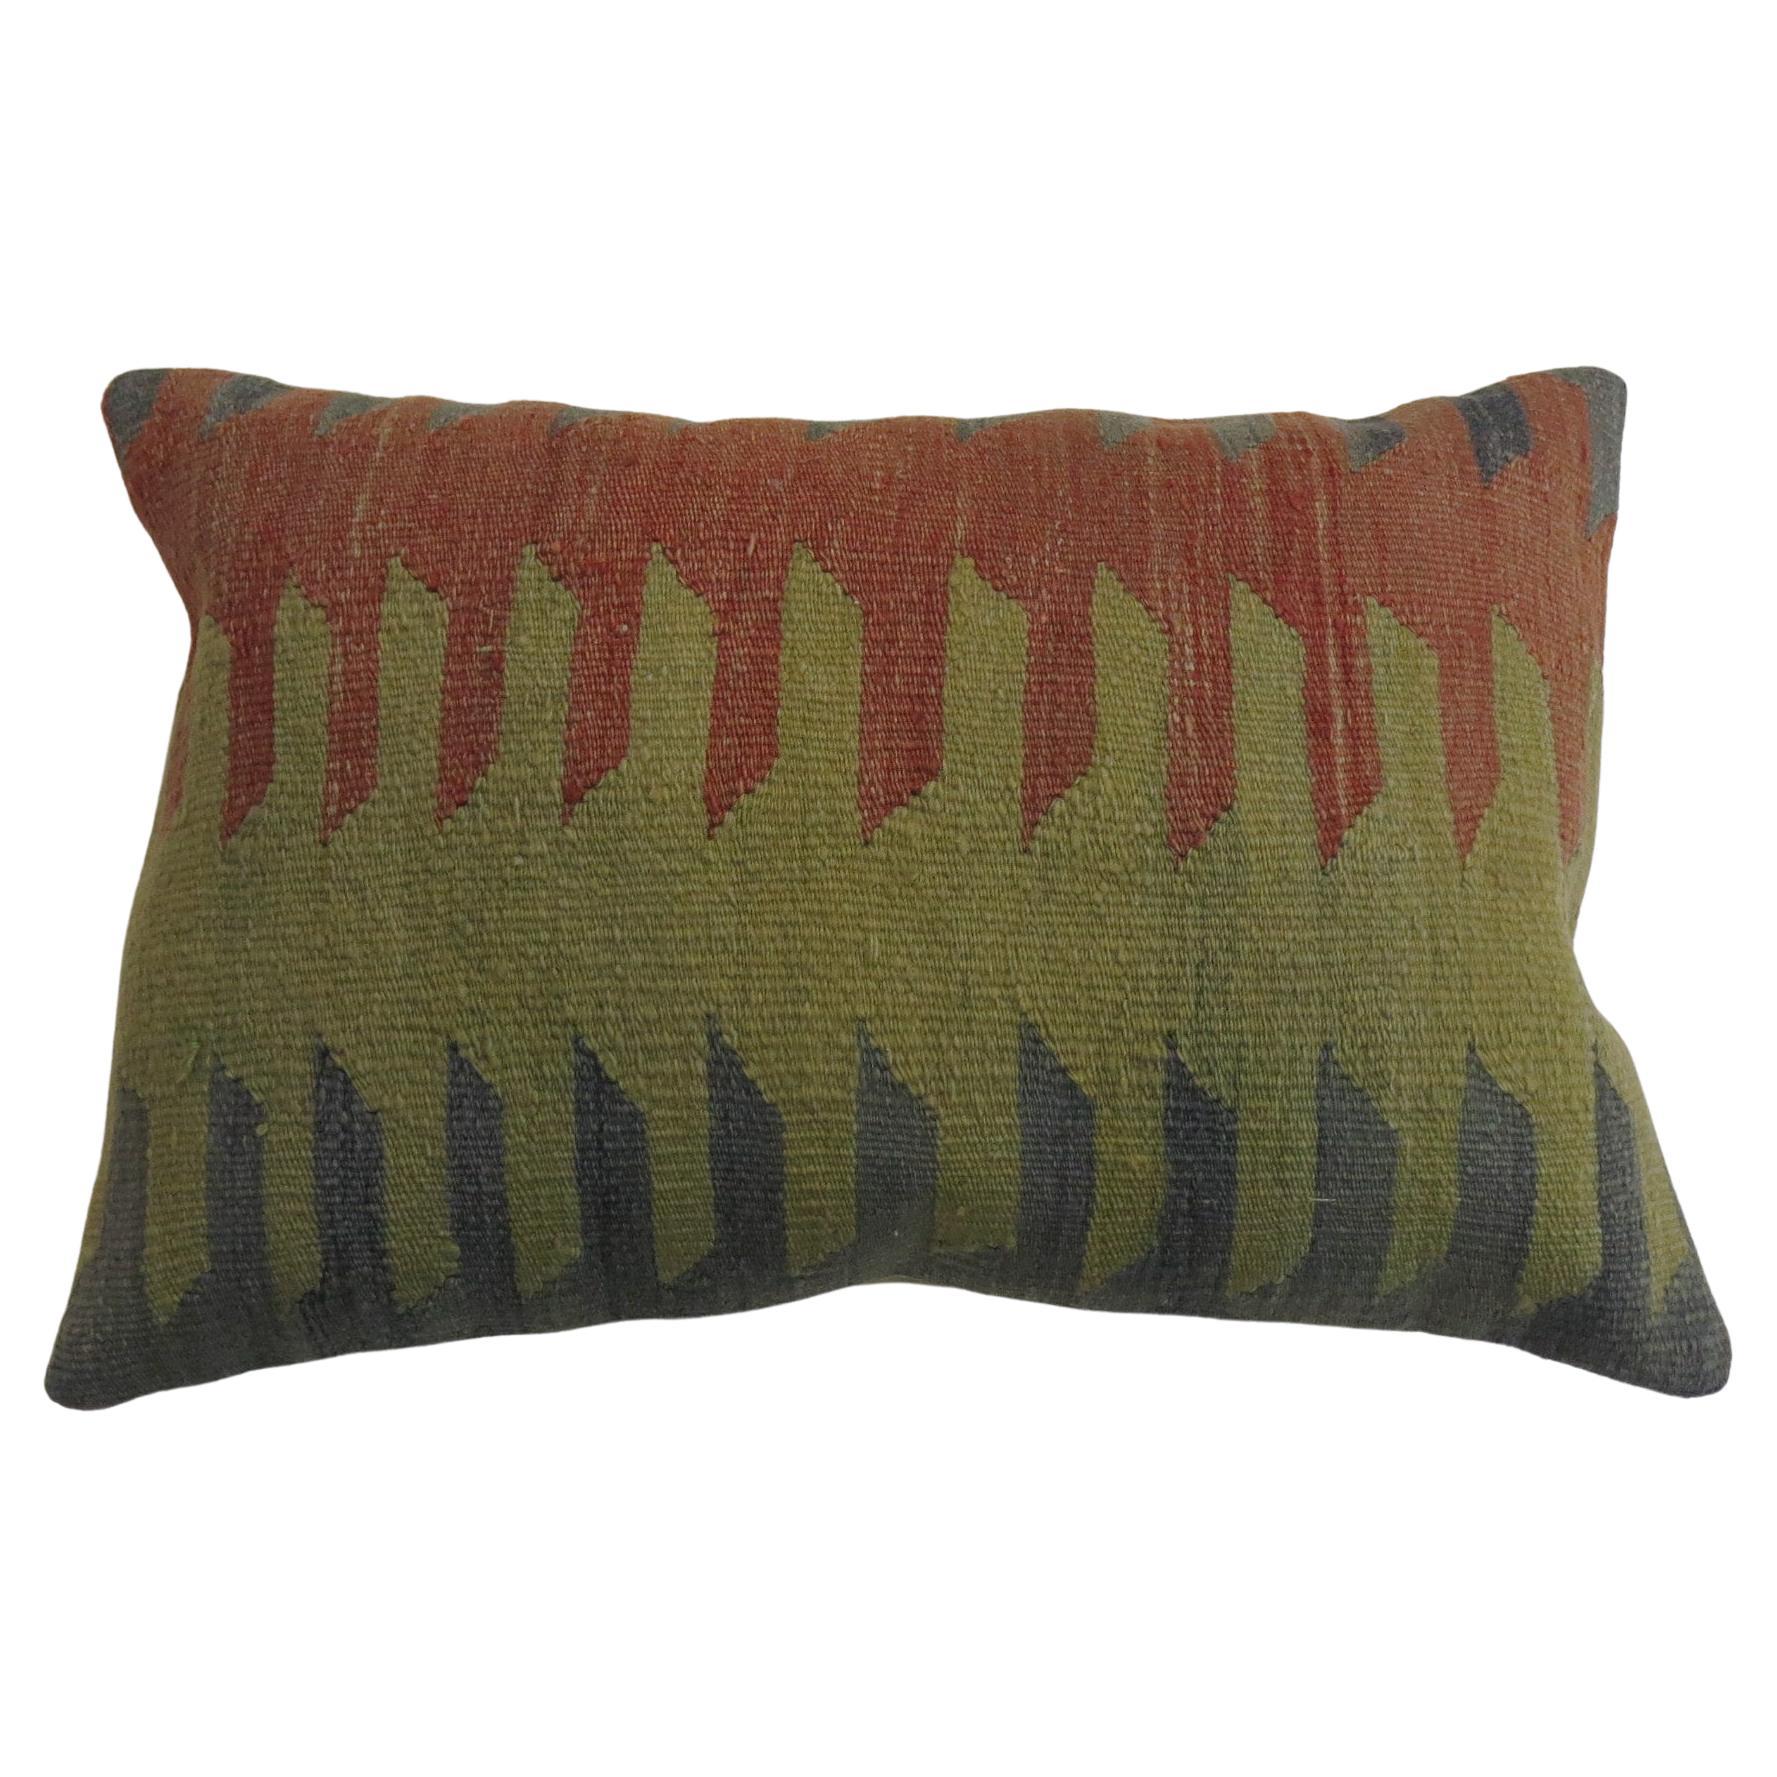 Pillow made from a vintage Turkish Kilim with cotton back. Zipper closure and foam insert provided.
Measures: 16